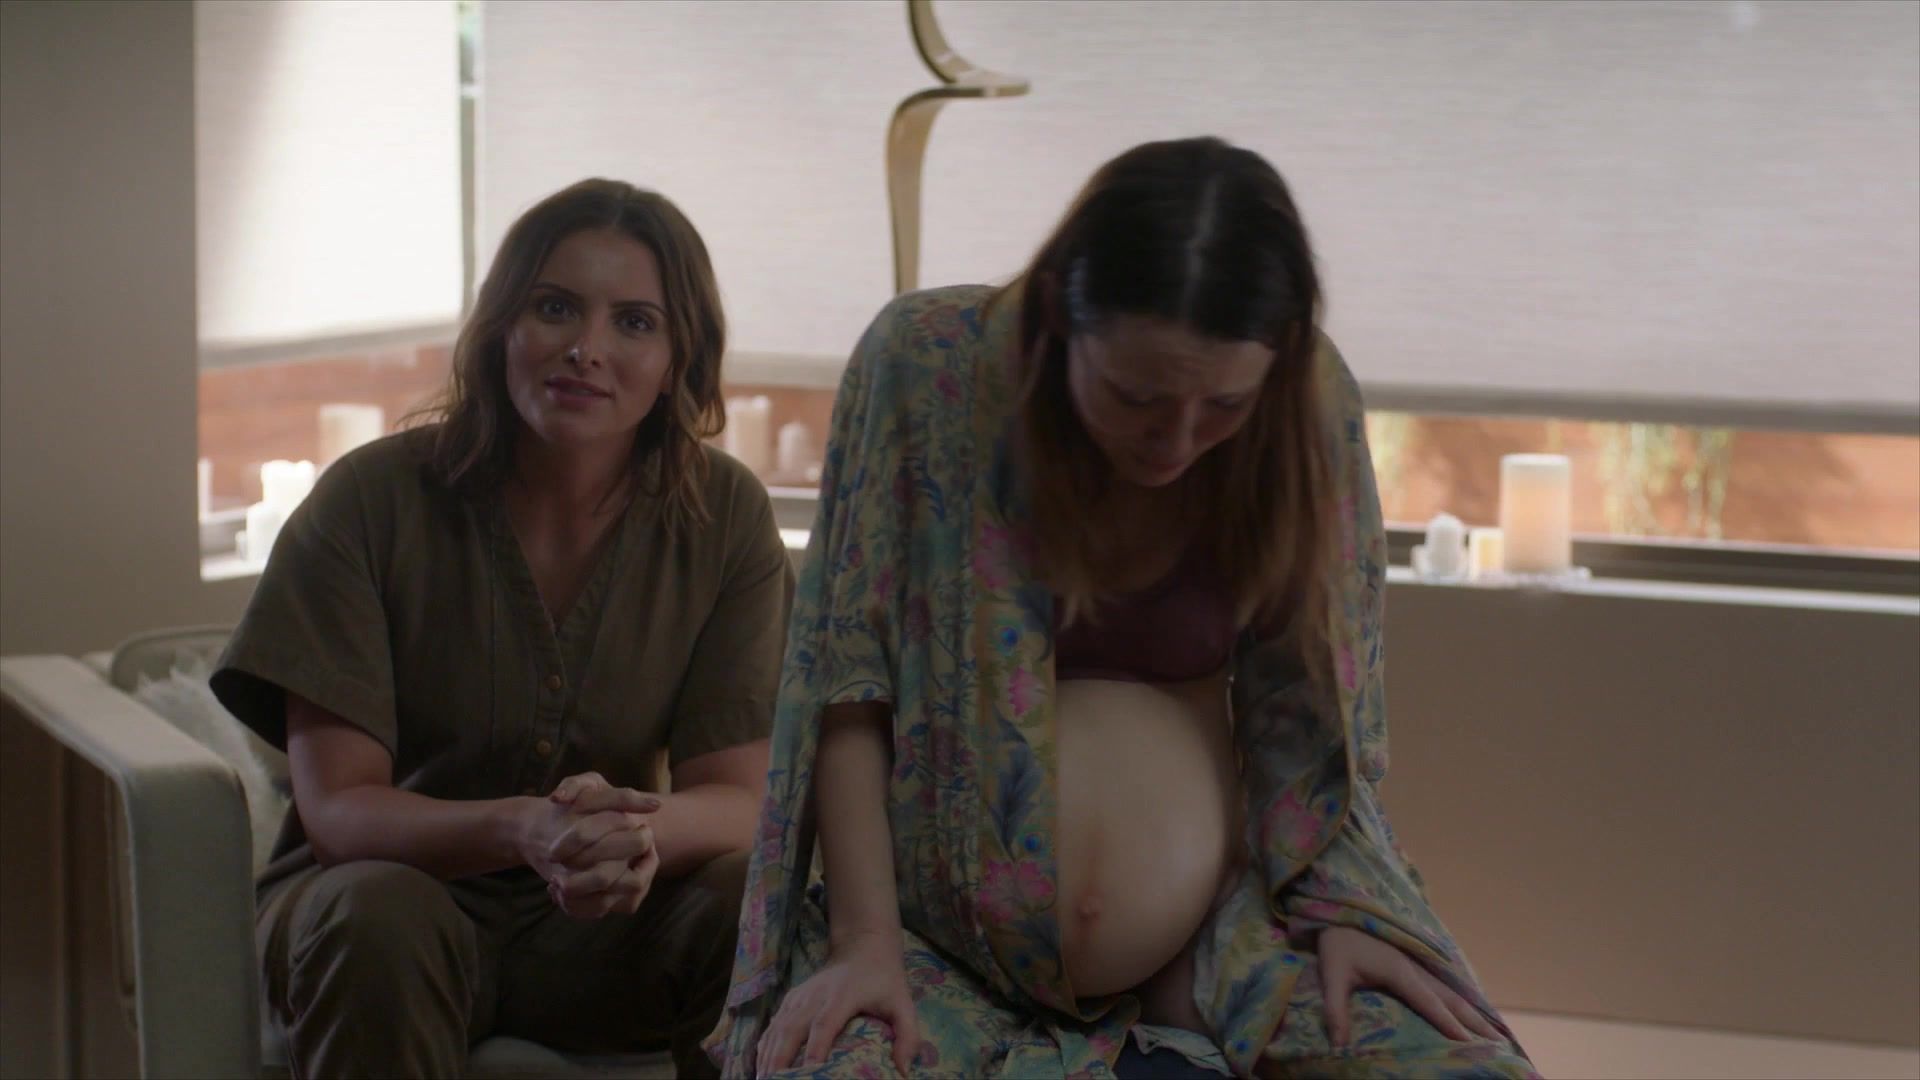 Room Emily Browning nude - The Affair s05e01 (2019) Porndig - 1